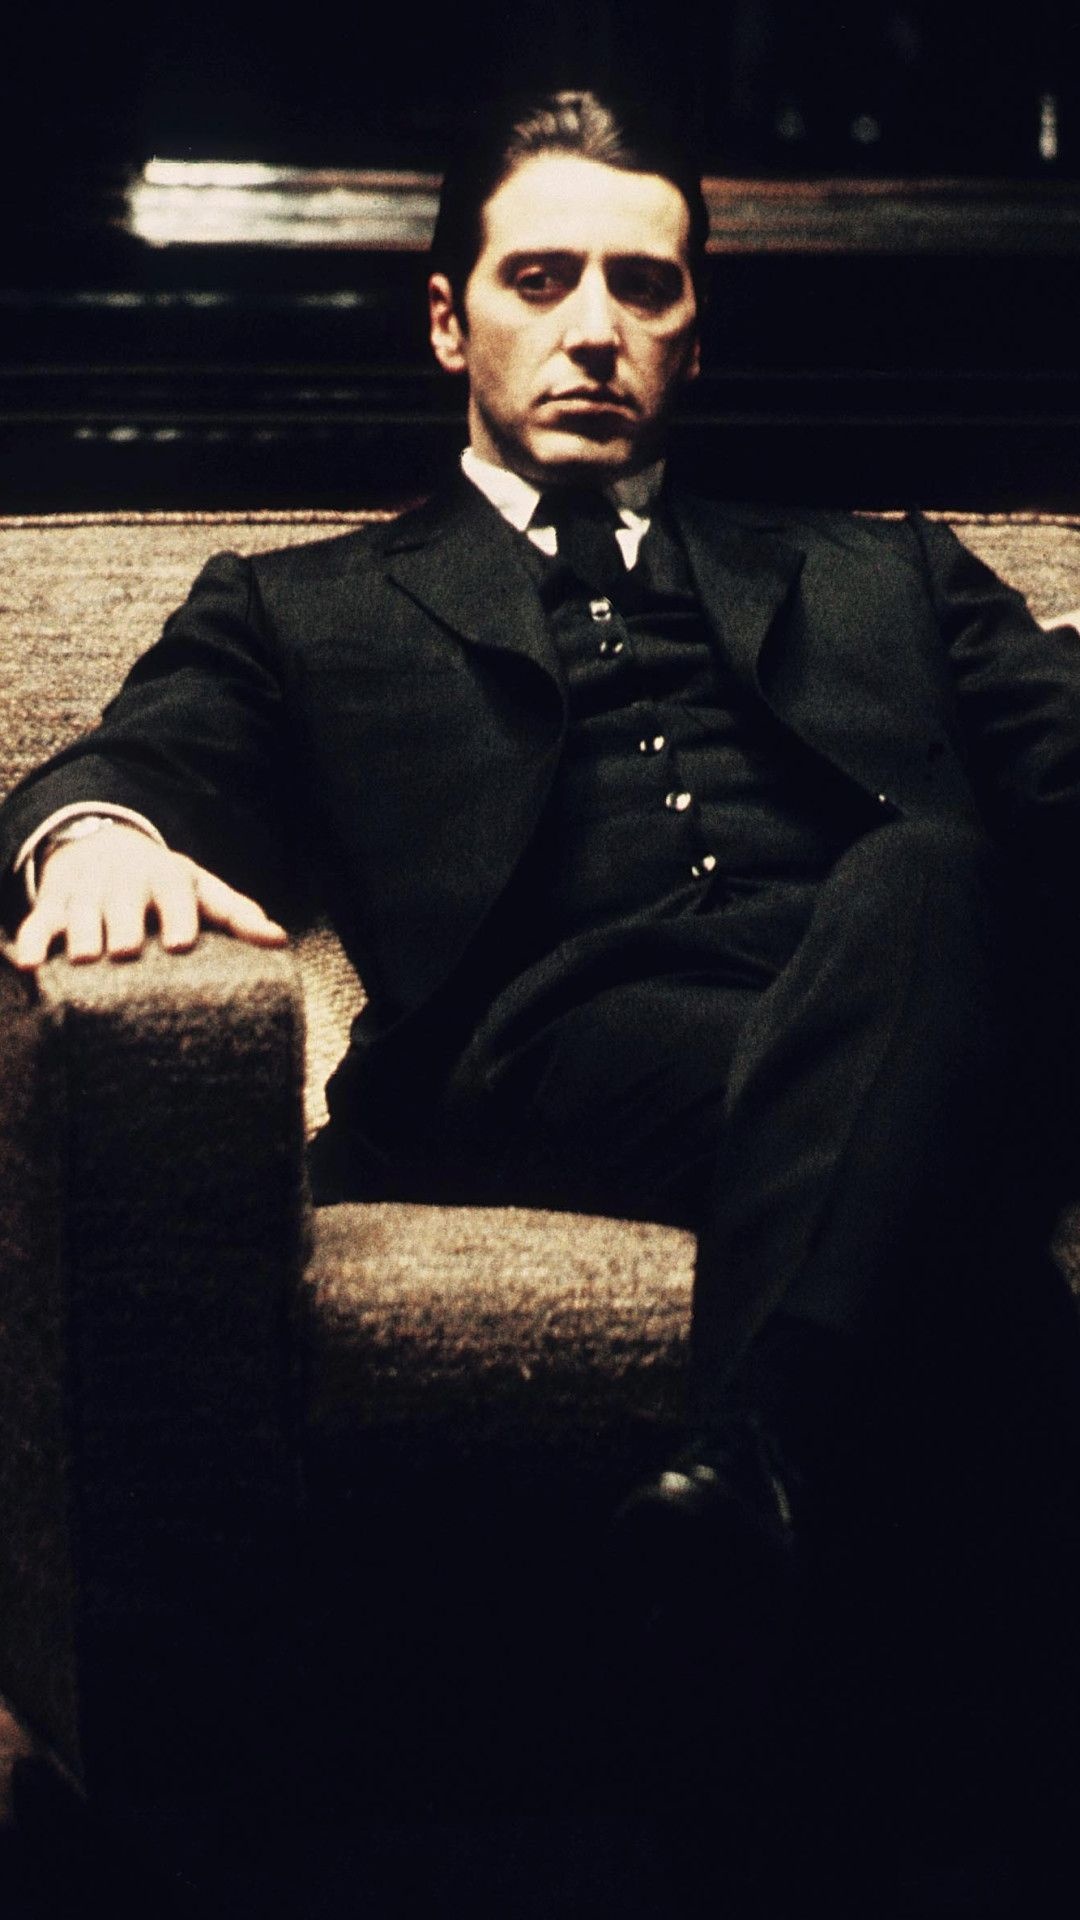 Michael Corleone, Godfather tribute, Striking iPhone wallpapers, Iconic imagery, 1080x1920 Full HD Phone